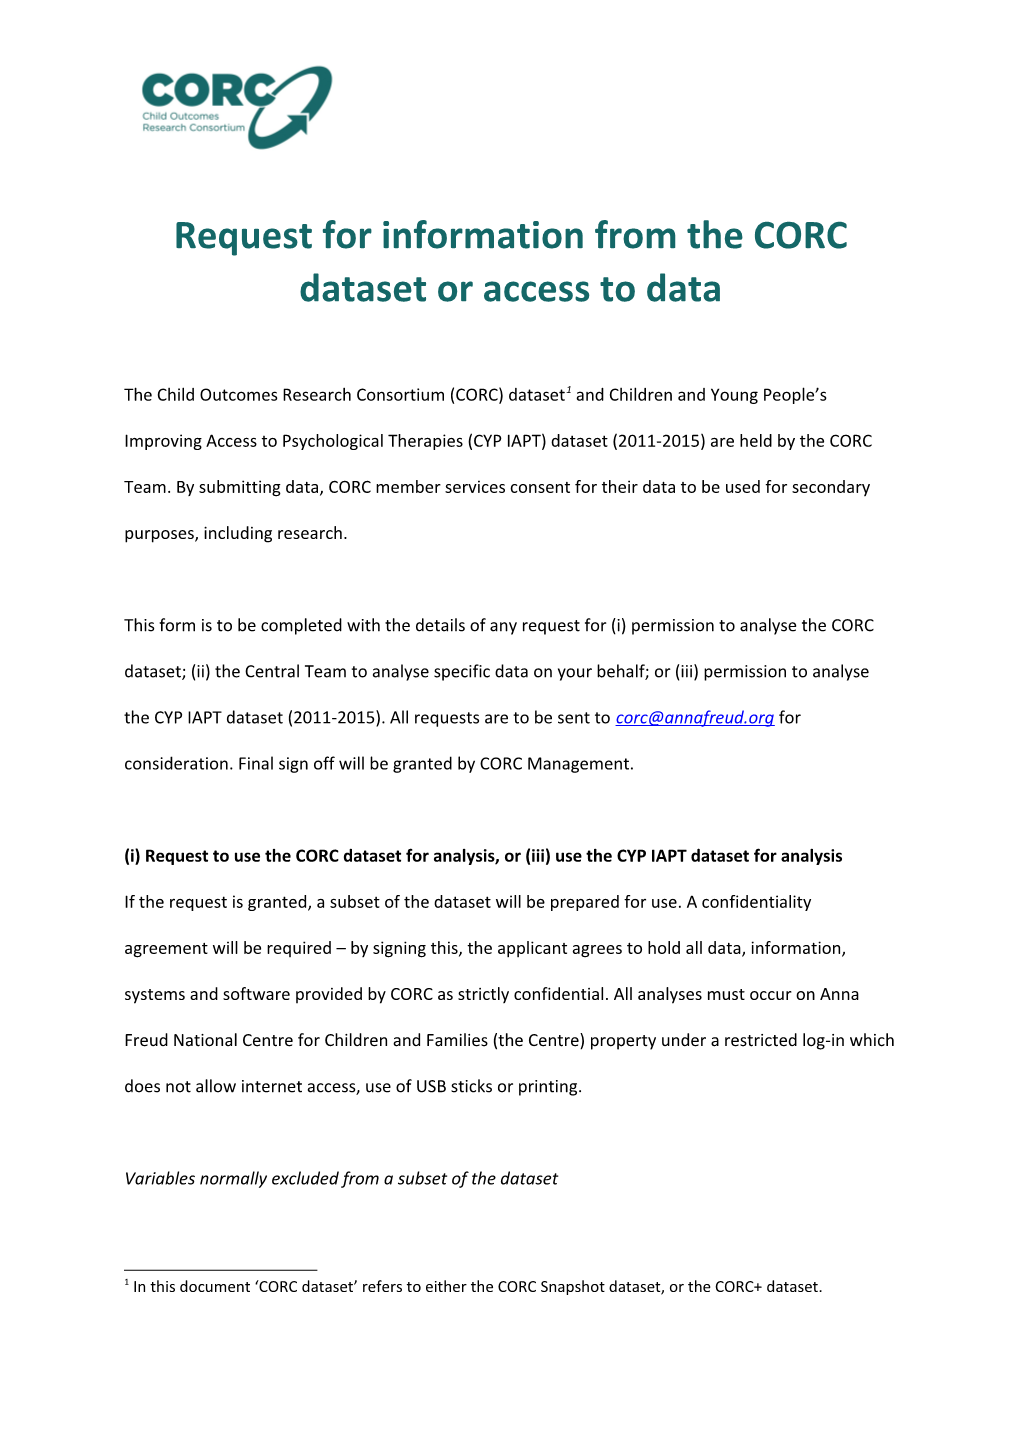 Request for Information from the CORC Dataset Or Access to Data